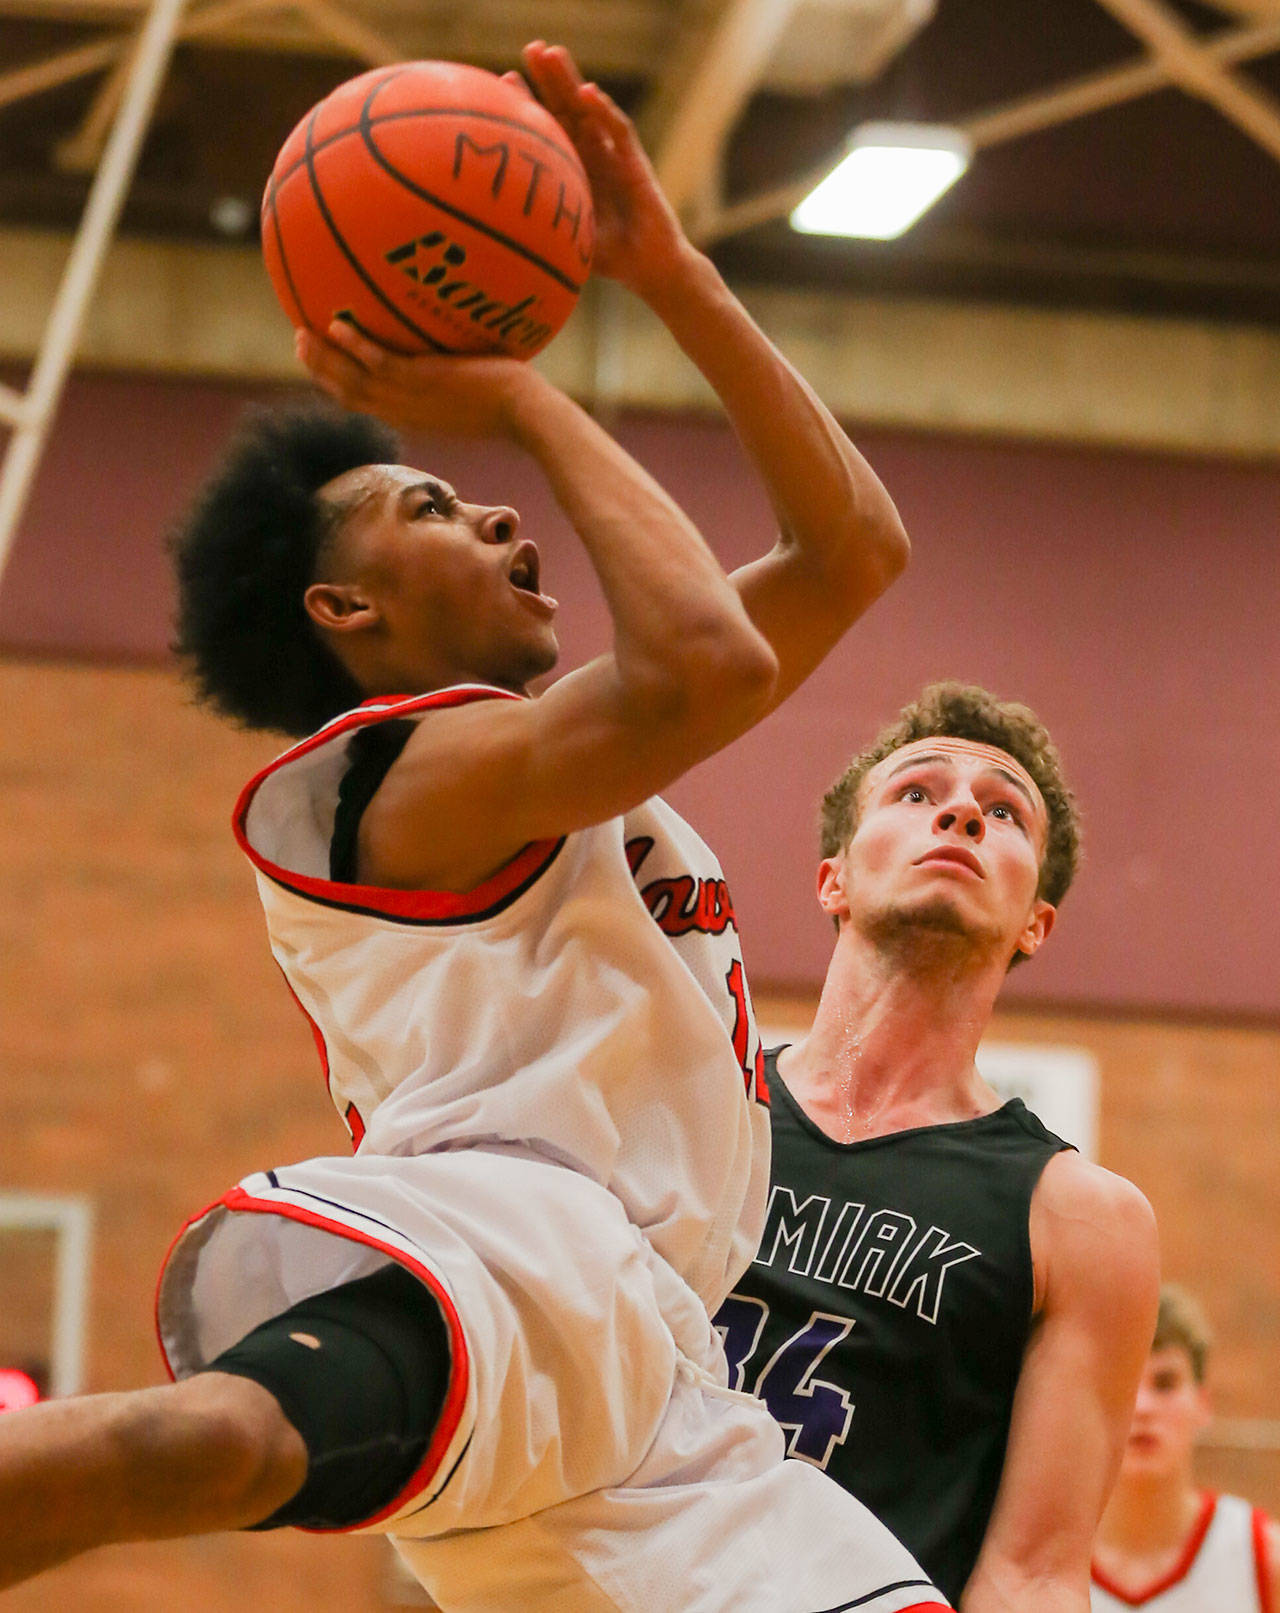 Mountlake Terrace’s Connor Williams (left) attempts a shot with Kamiak’s Daniel Sharpe looking on Wednesday night as Williams helped the Hawks to a 63-59 win over the Knights in Mountlake Terrace. (Kevin Clark / The Herald)